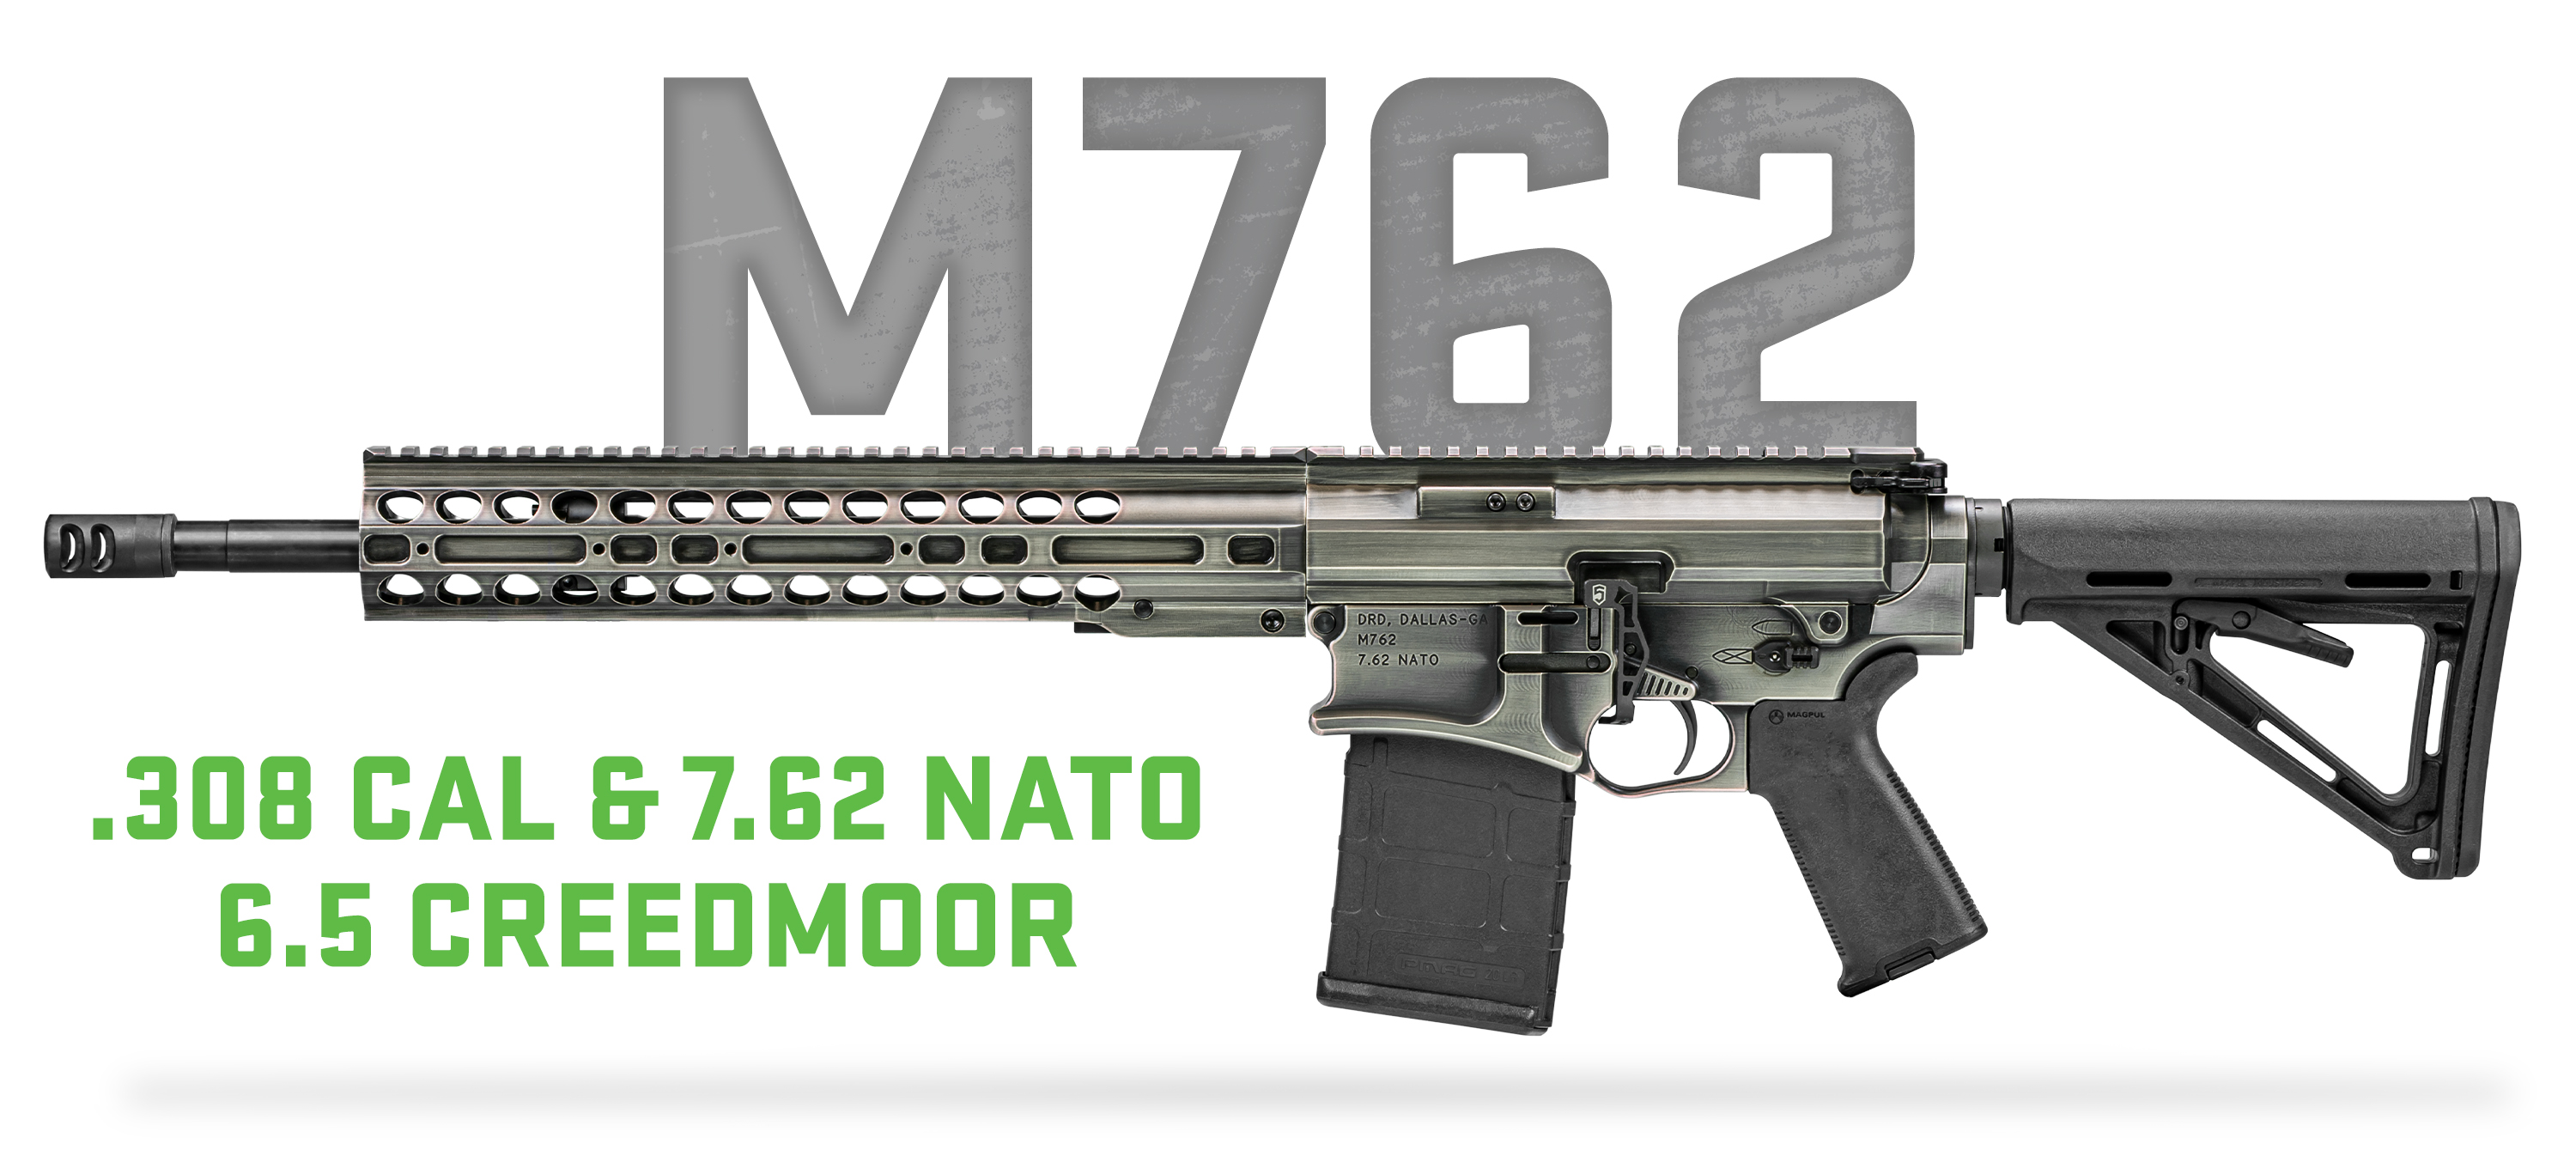 Product image of the DRD Tactical M762 rifle